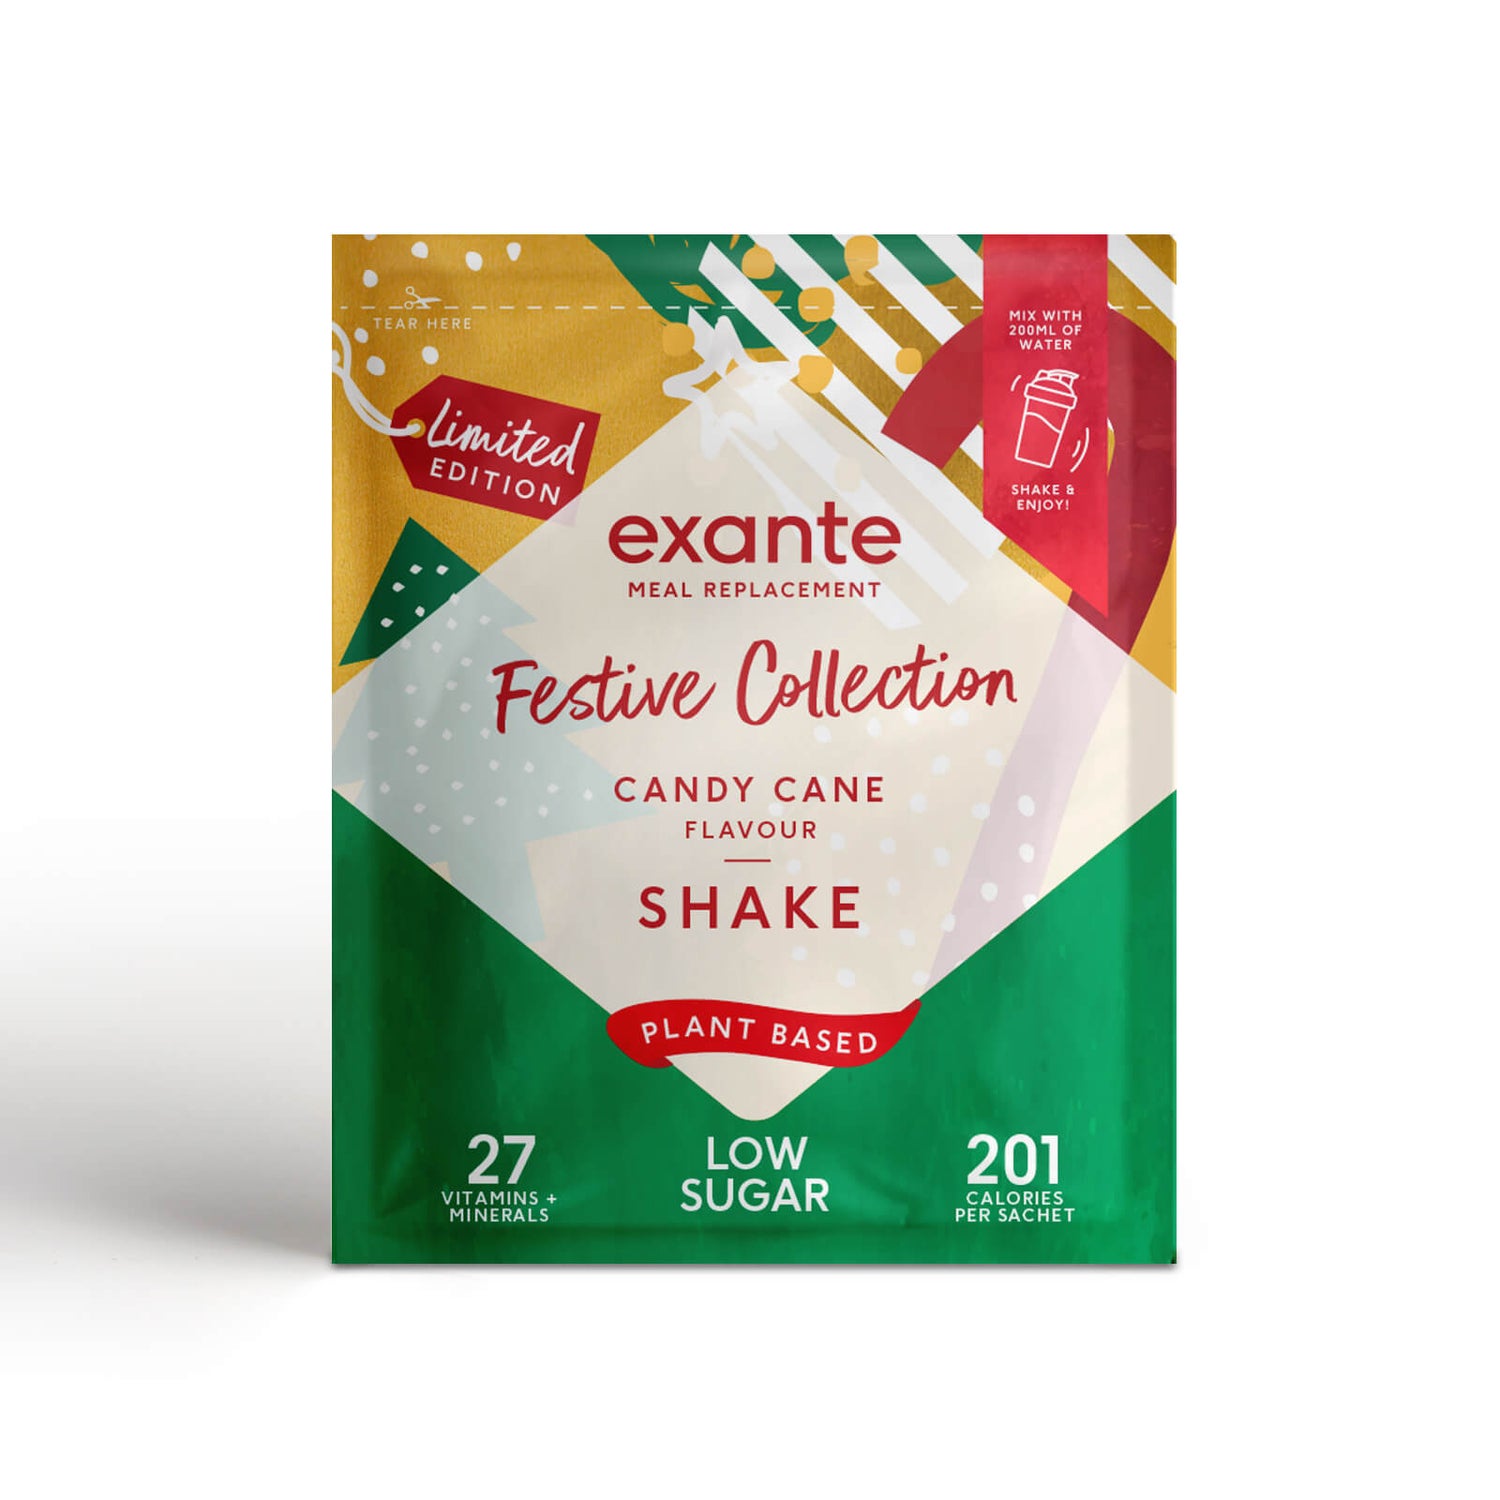 Plant Based Meal Replacement Candy Cane Shake